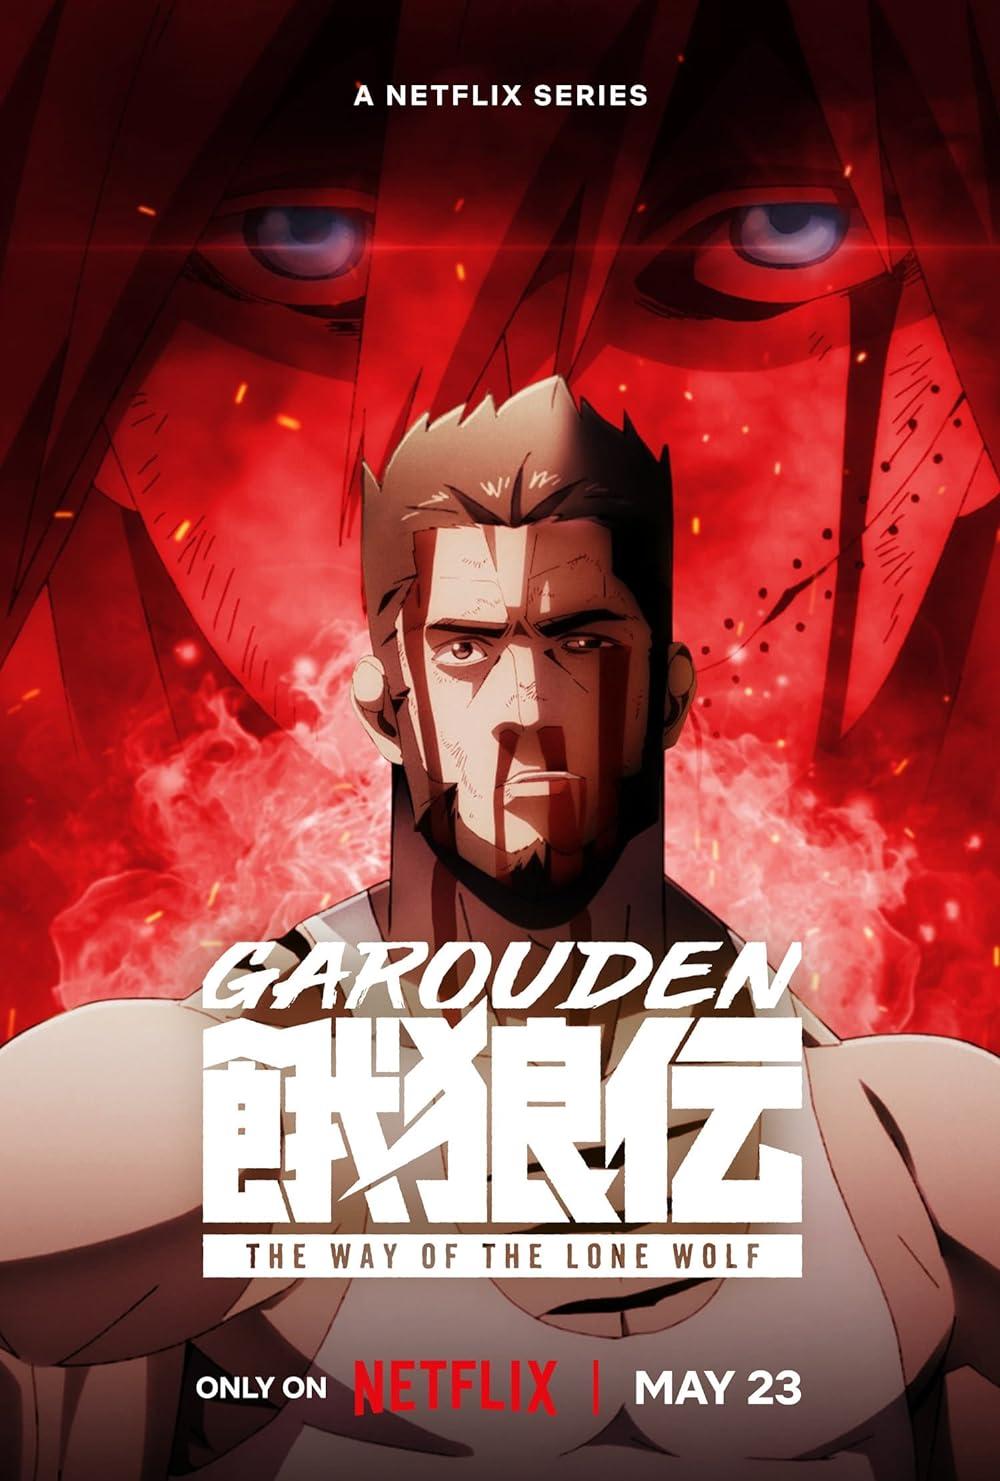 Garouden: The Way of the Lone Wolf (Netflix) – May 23Garouden: The Way of the Lone Wolf is a captivating martial arts anime that follows Juuzou Fujimaki, a master of Takemiya-ryuu martial arts, as he enters a lethal underground fighting tournament. With a bounty on his head and a relentless detective in pursuit, Juuzou faces his personal demons and formidable foes in brutal match-ups.